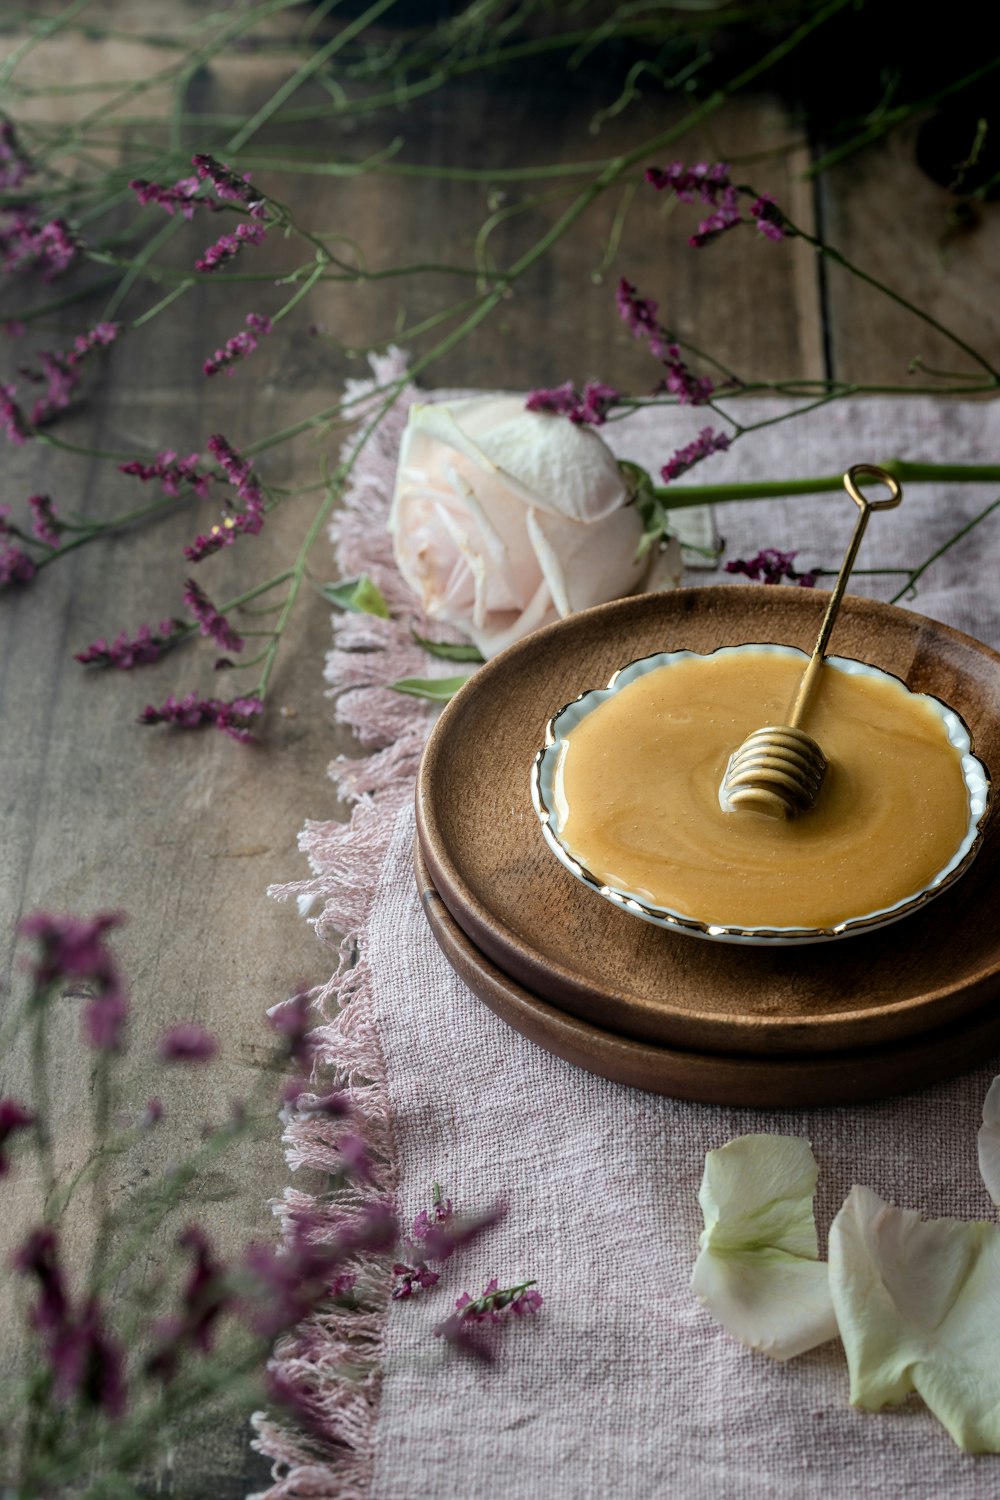 a plate with a honey dip on it next to flowers